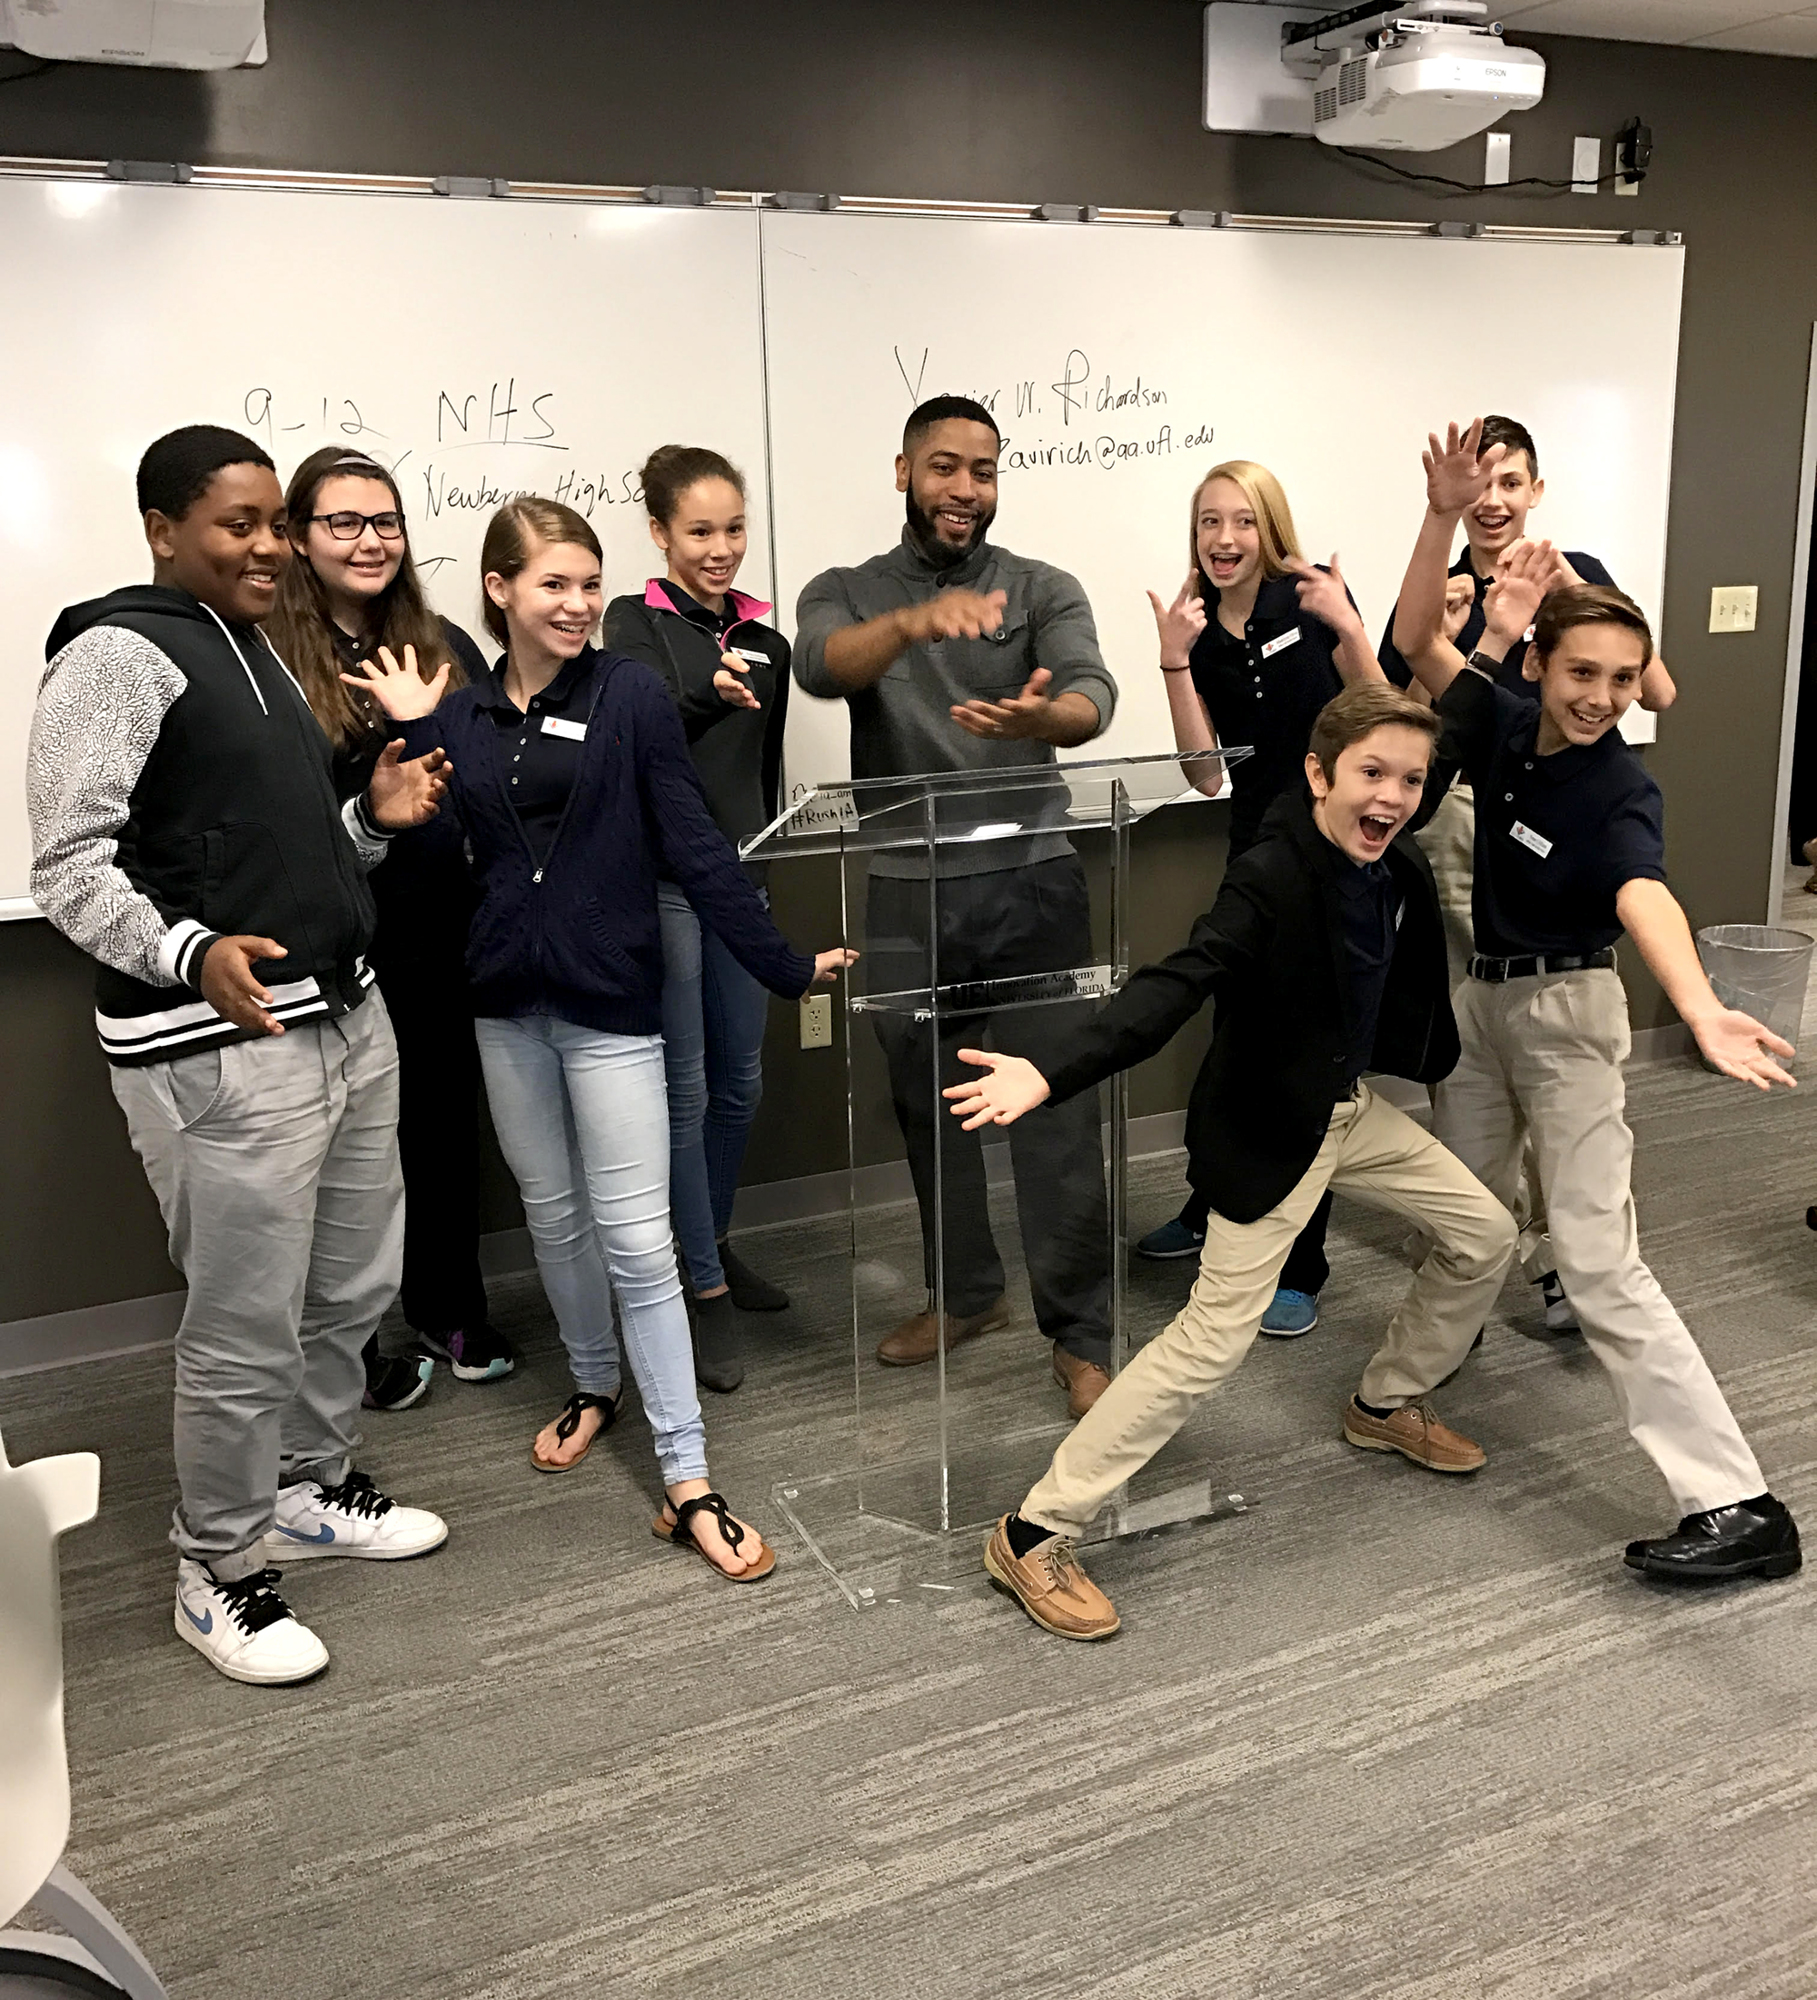 Xavier Richardson, academic advisor at the UF Innovation Academy (center) has fun with some Flagler students during a field trip to the Gainesville campus. Courtesy photo